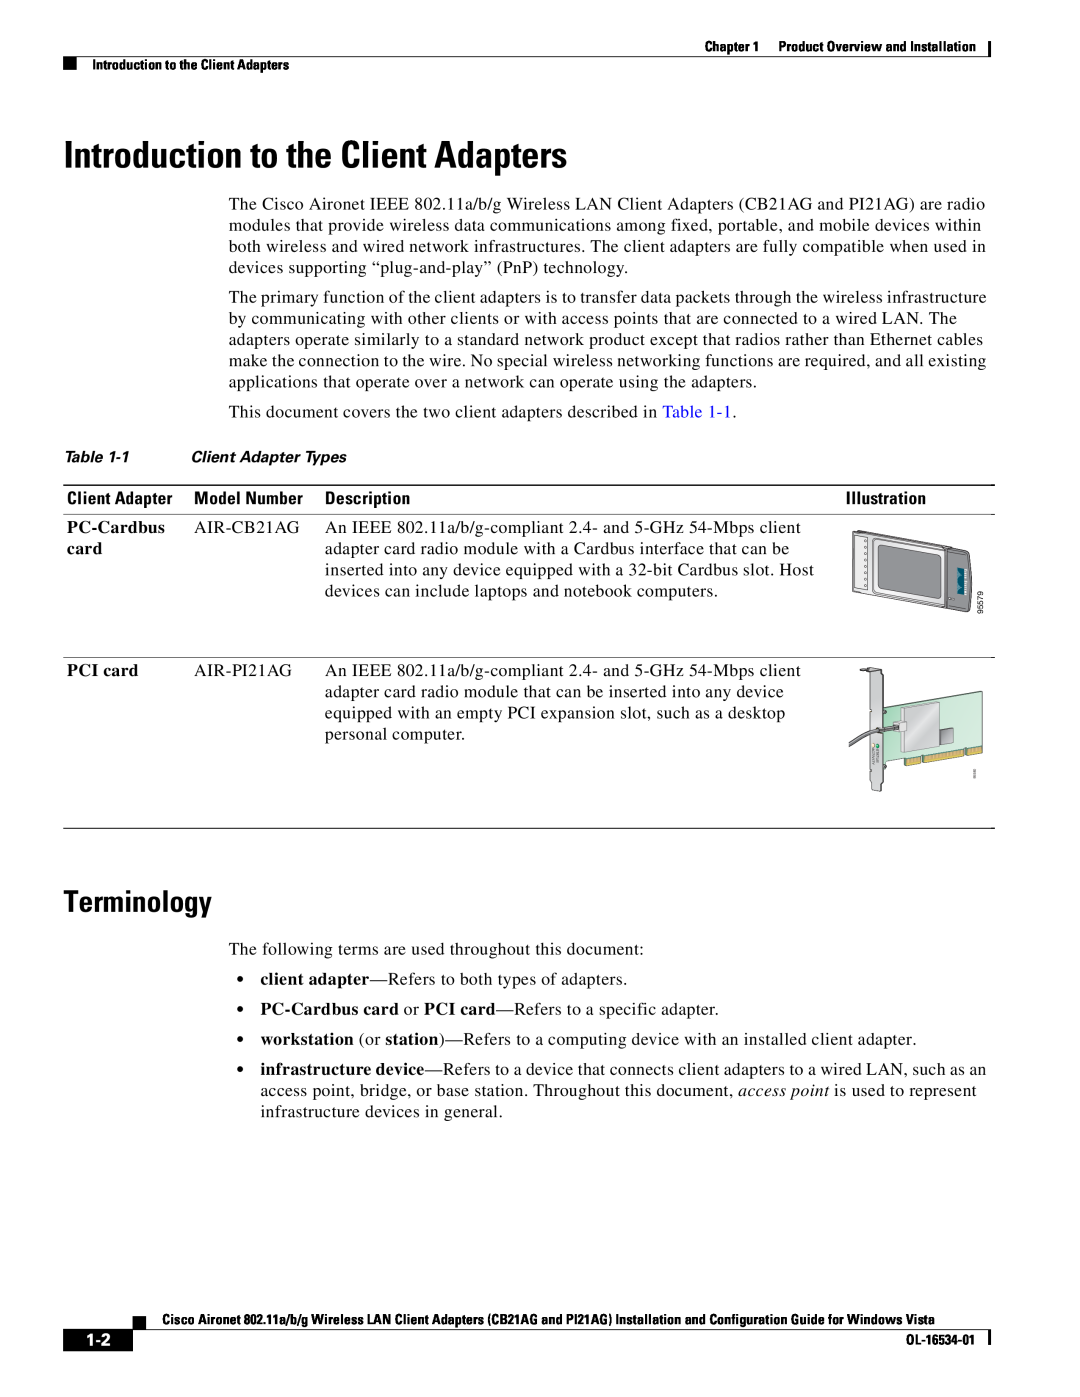 Cisco Systems PI21AG, CB21AG manual Introduction to the Client Adapters, Terminology, PC-Cardbus, PCI card 